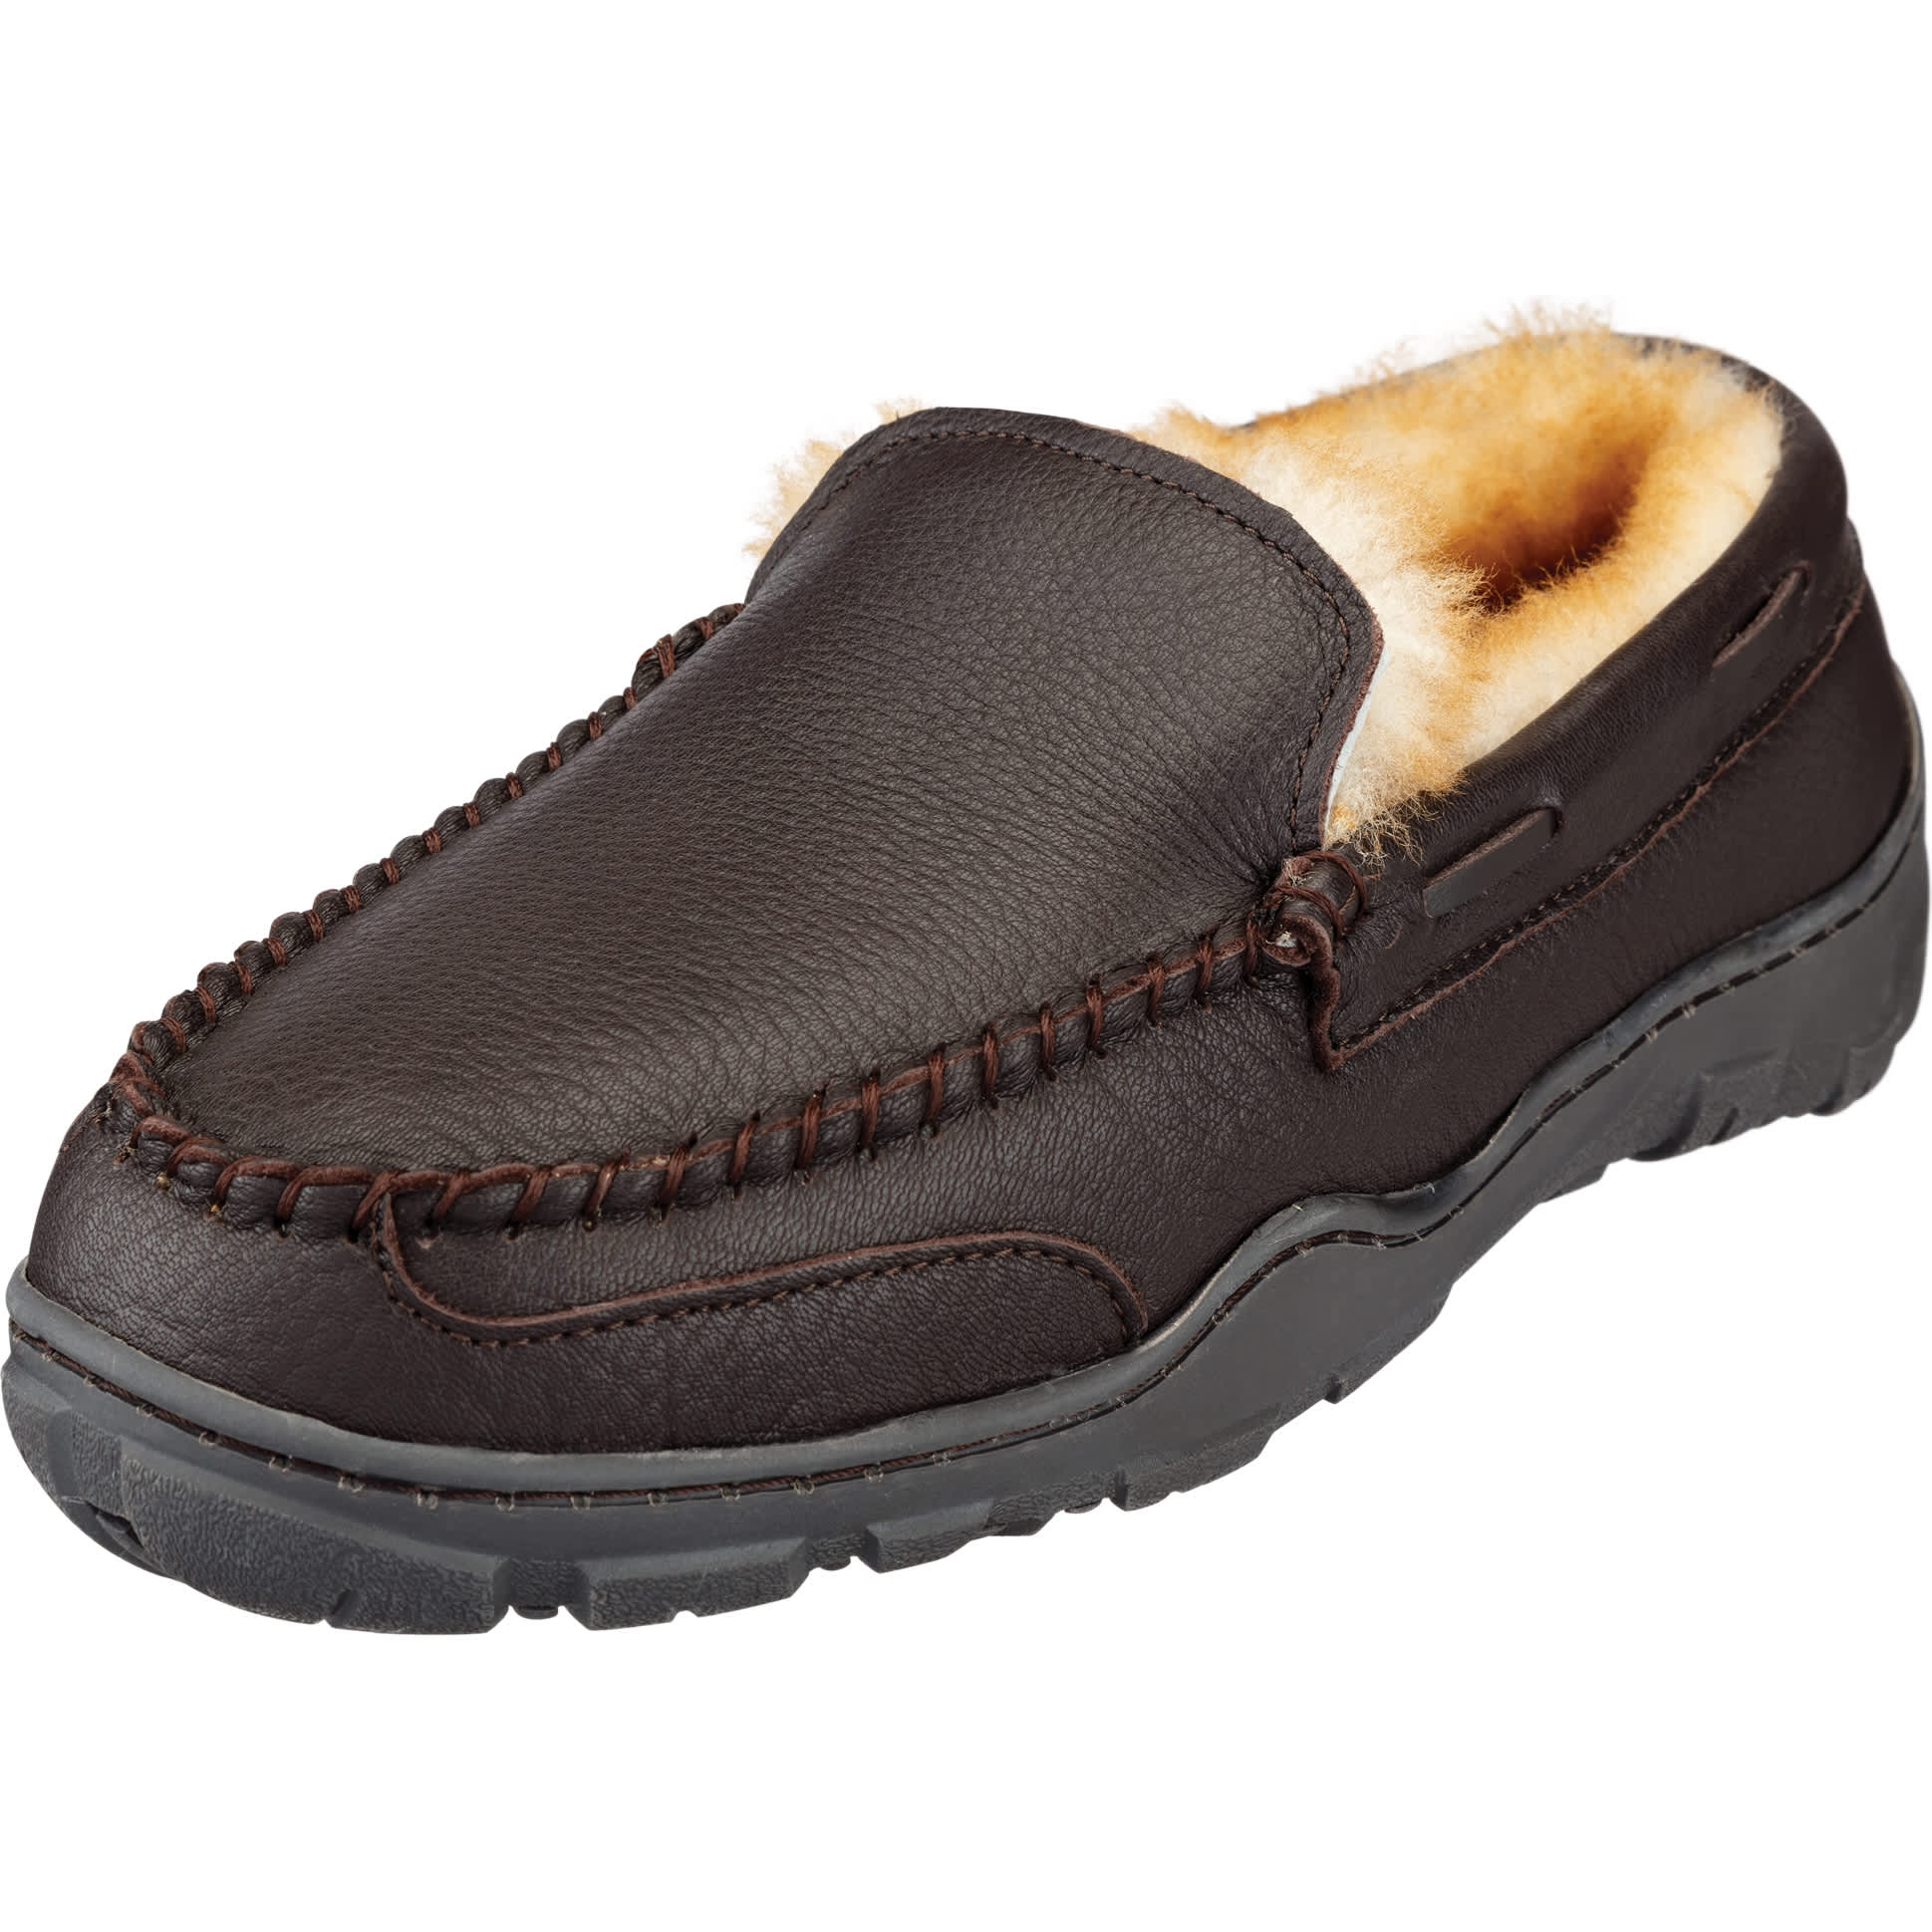 Natural Reflections® Women's Lexi Scuff Slippers